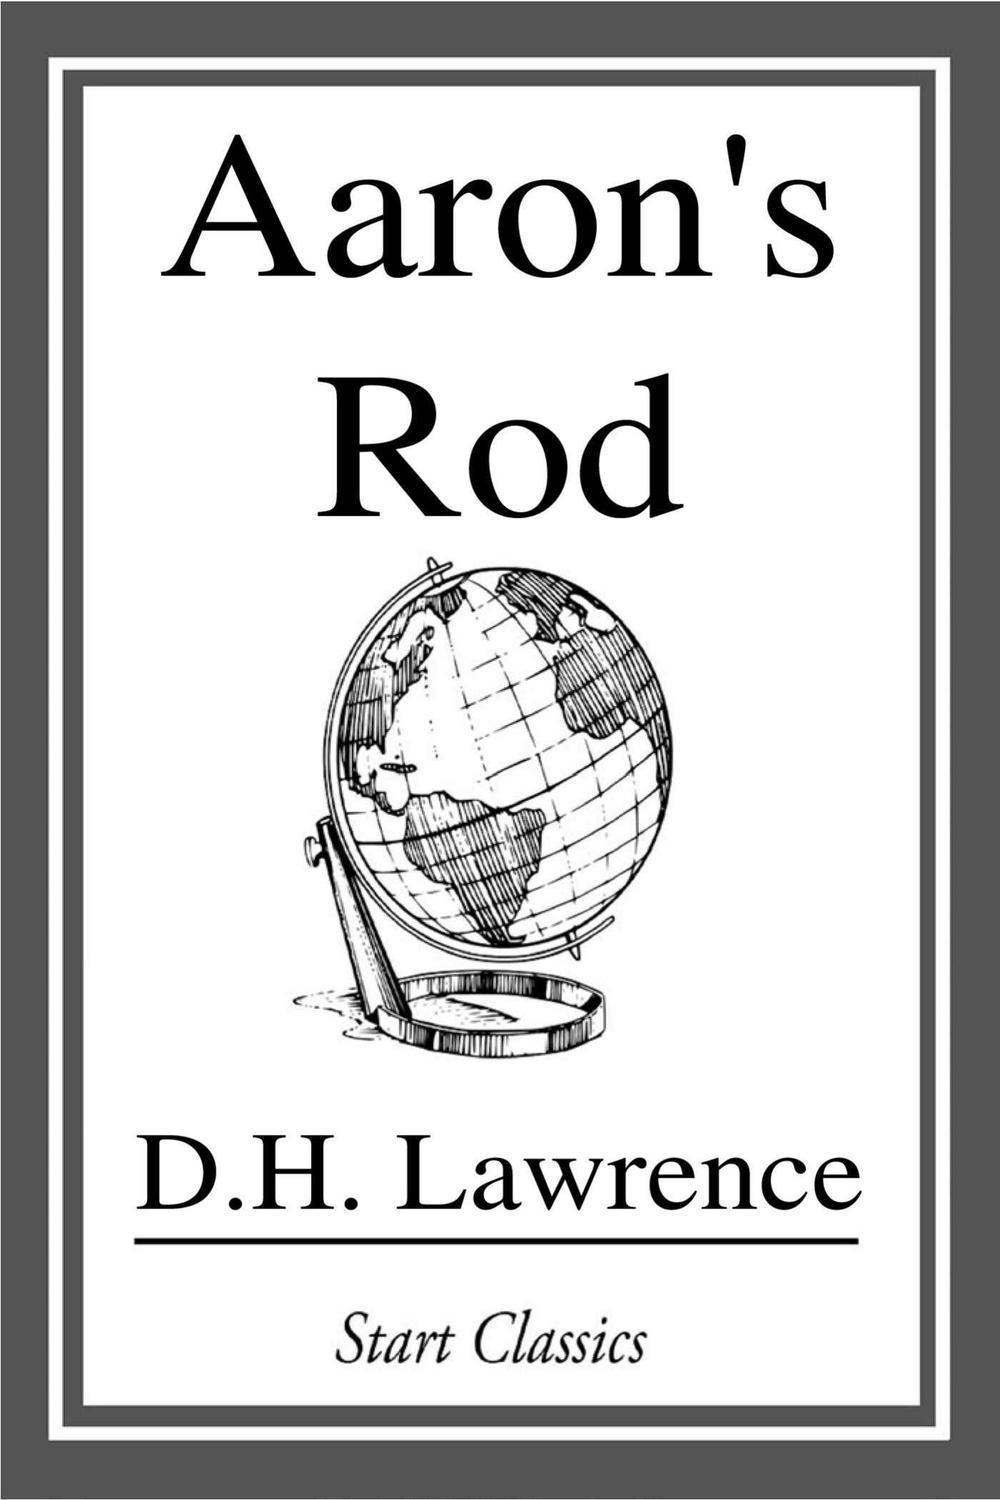 Aaron's Rod - D. H. Lawrence,,